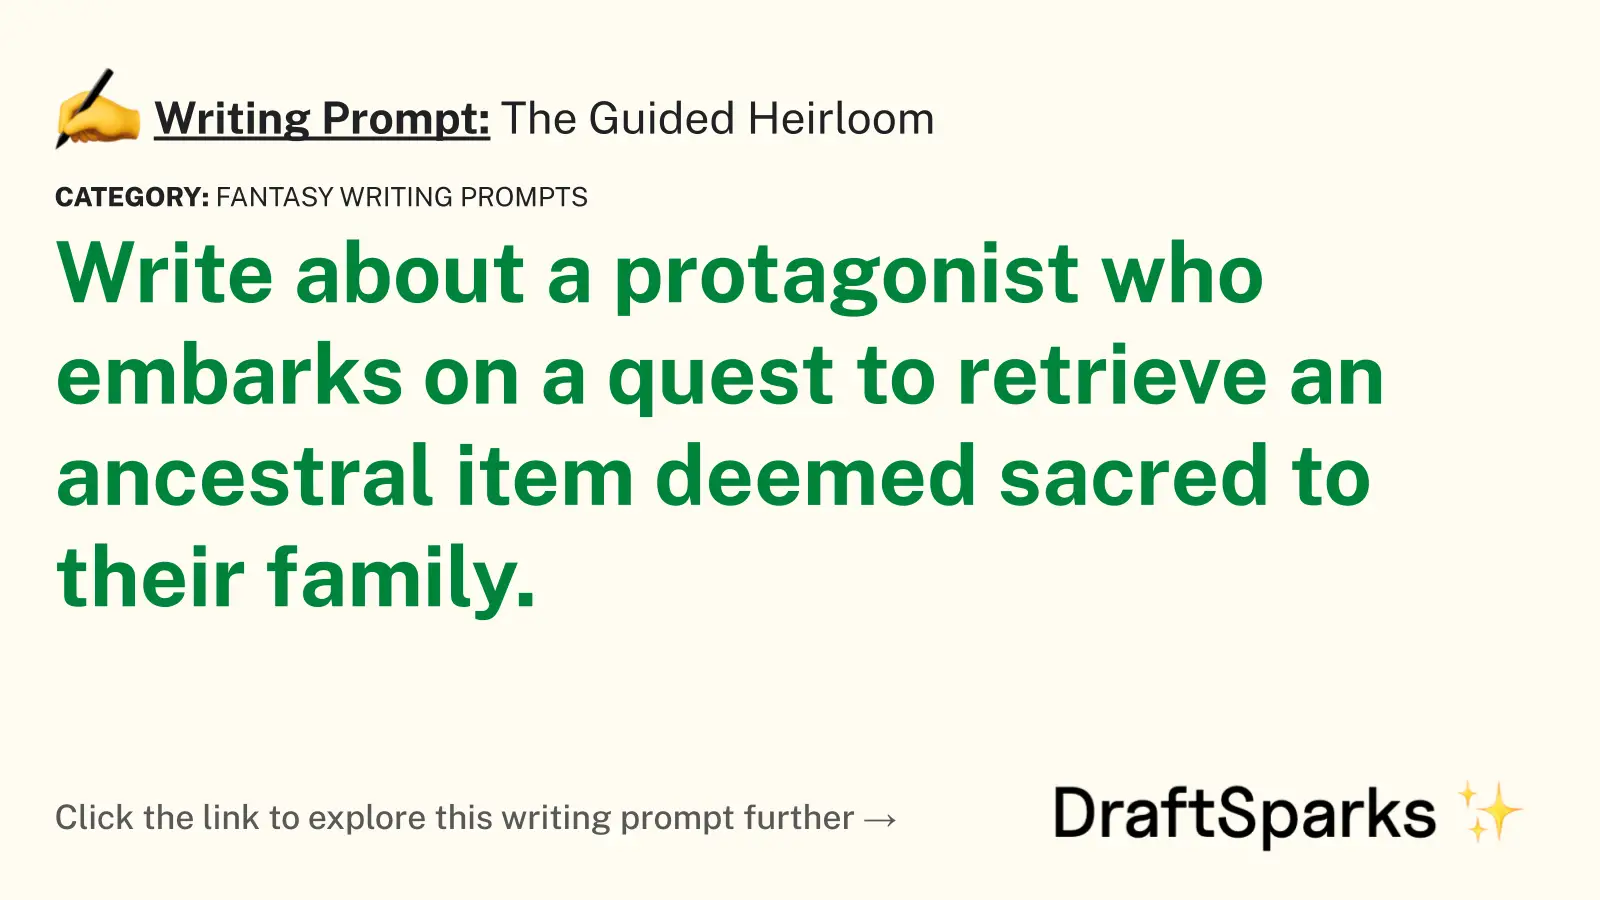 The Guided Heirloom